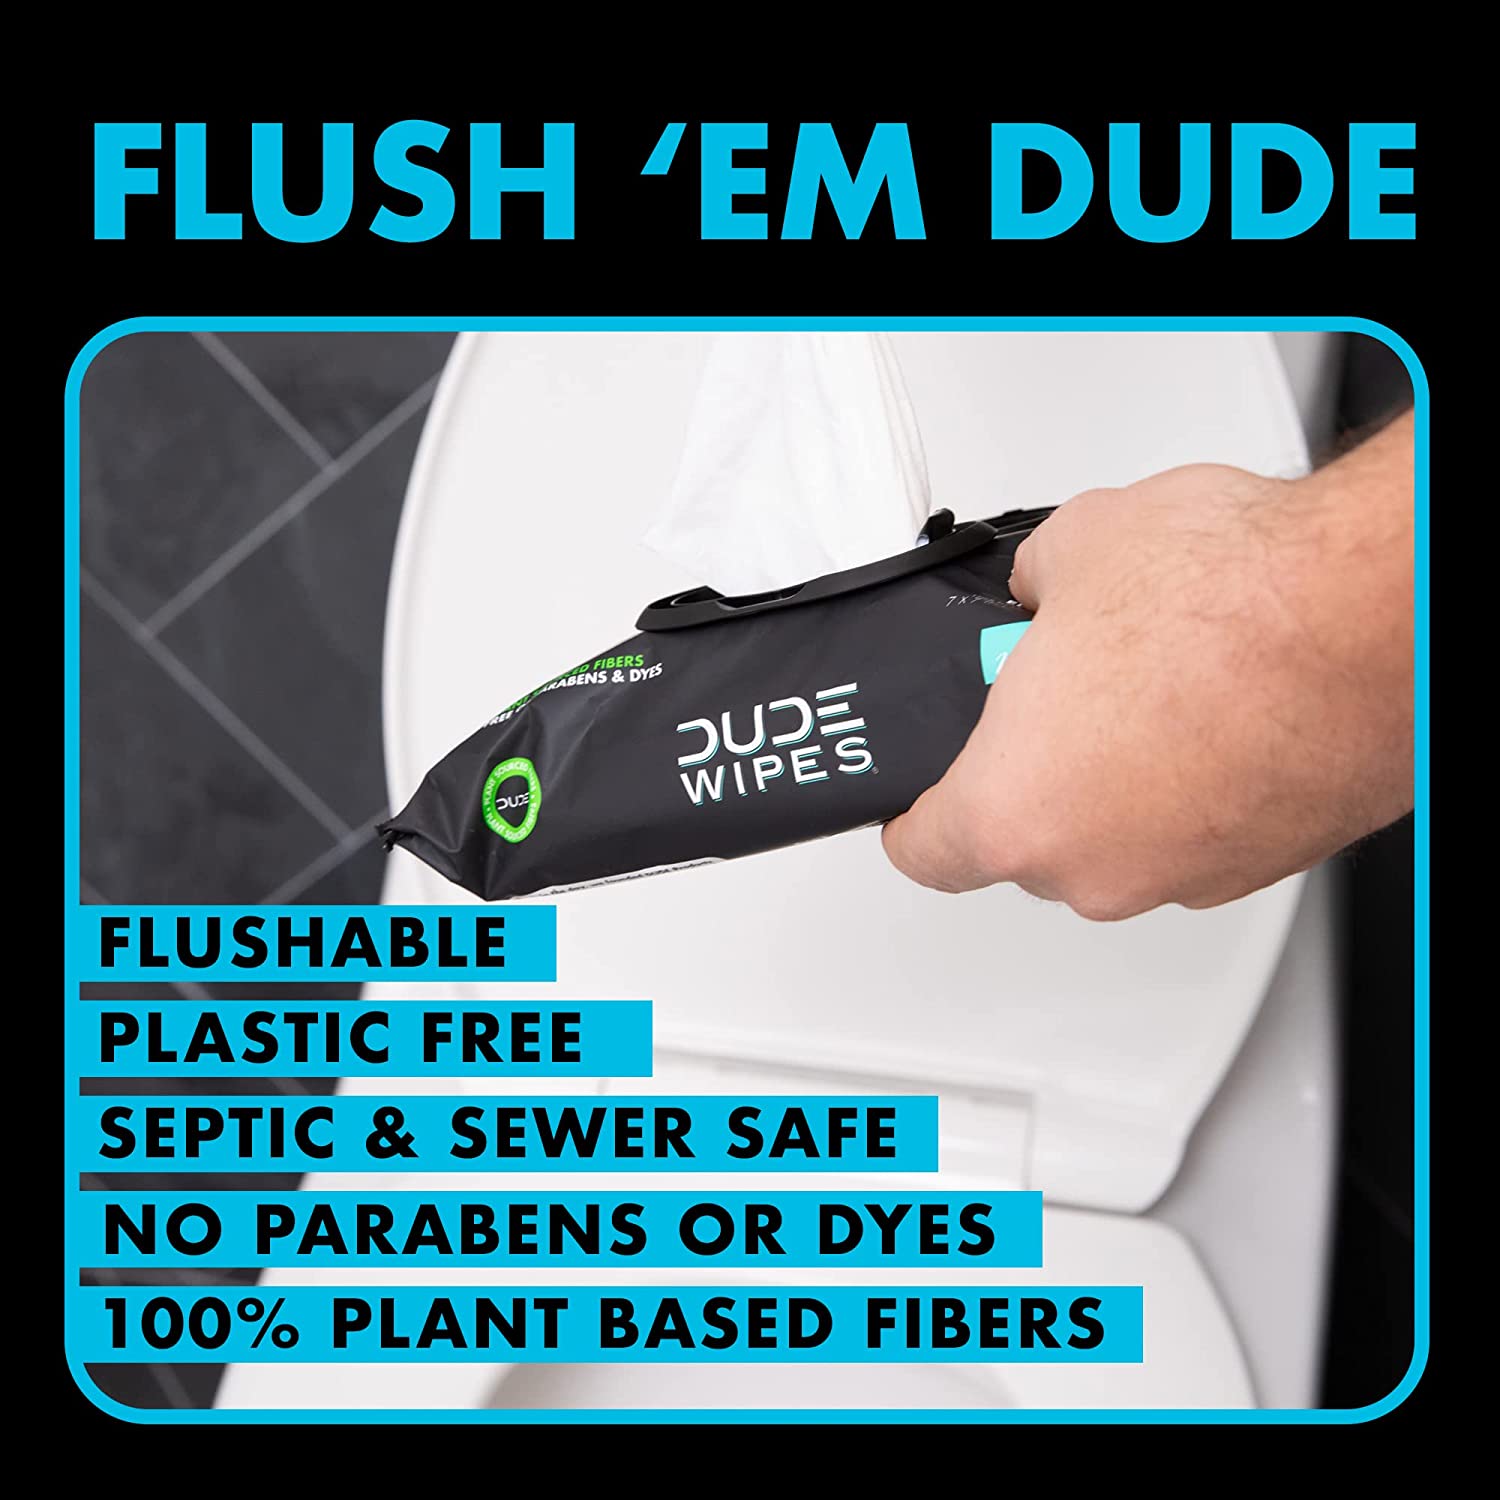 Say goodbye to toilet paper—hello, better hygiene with Dude Wipes